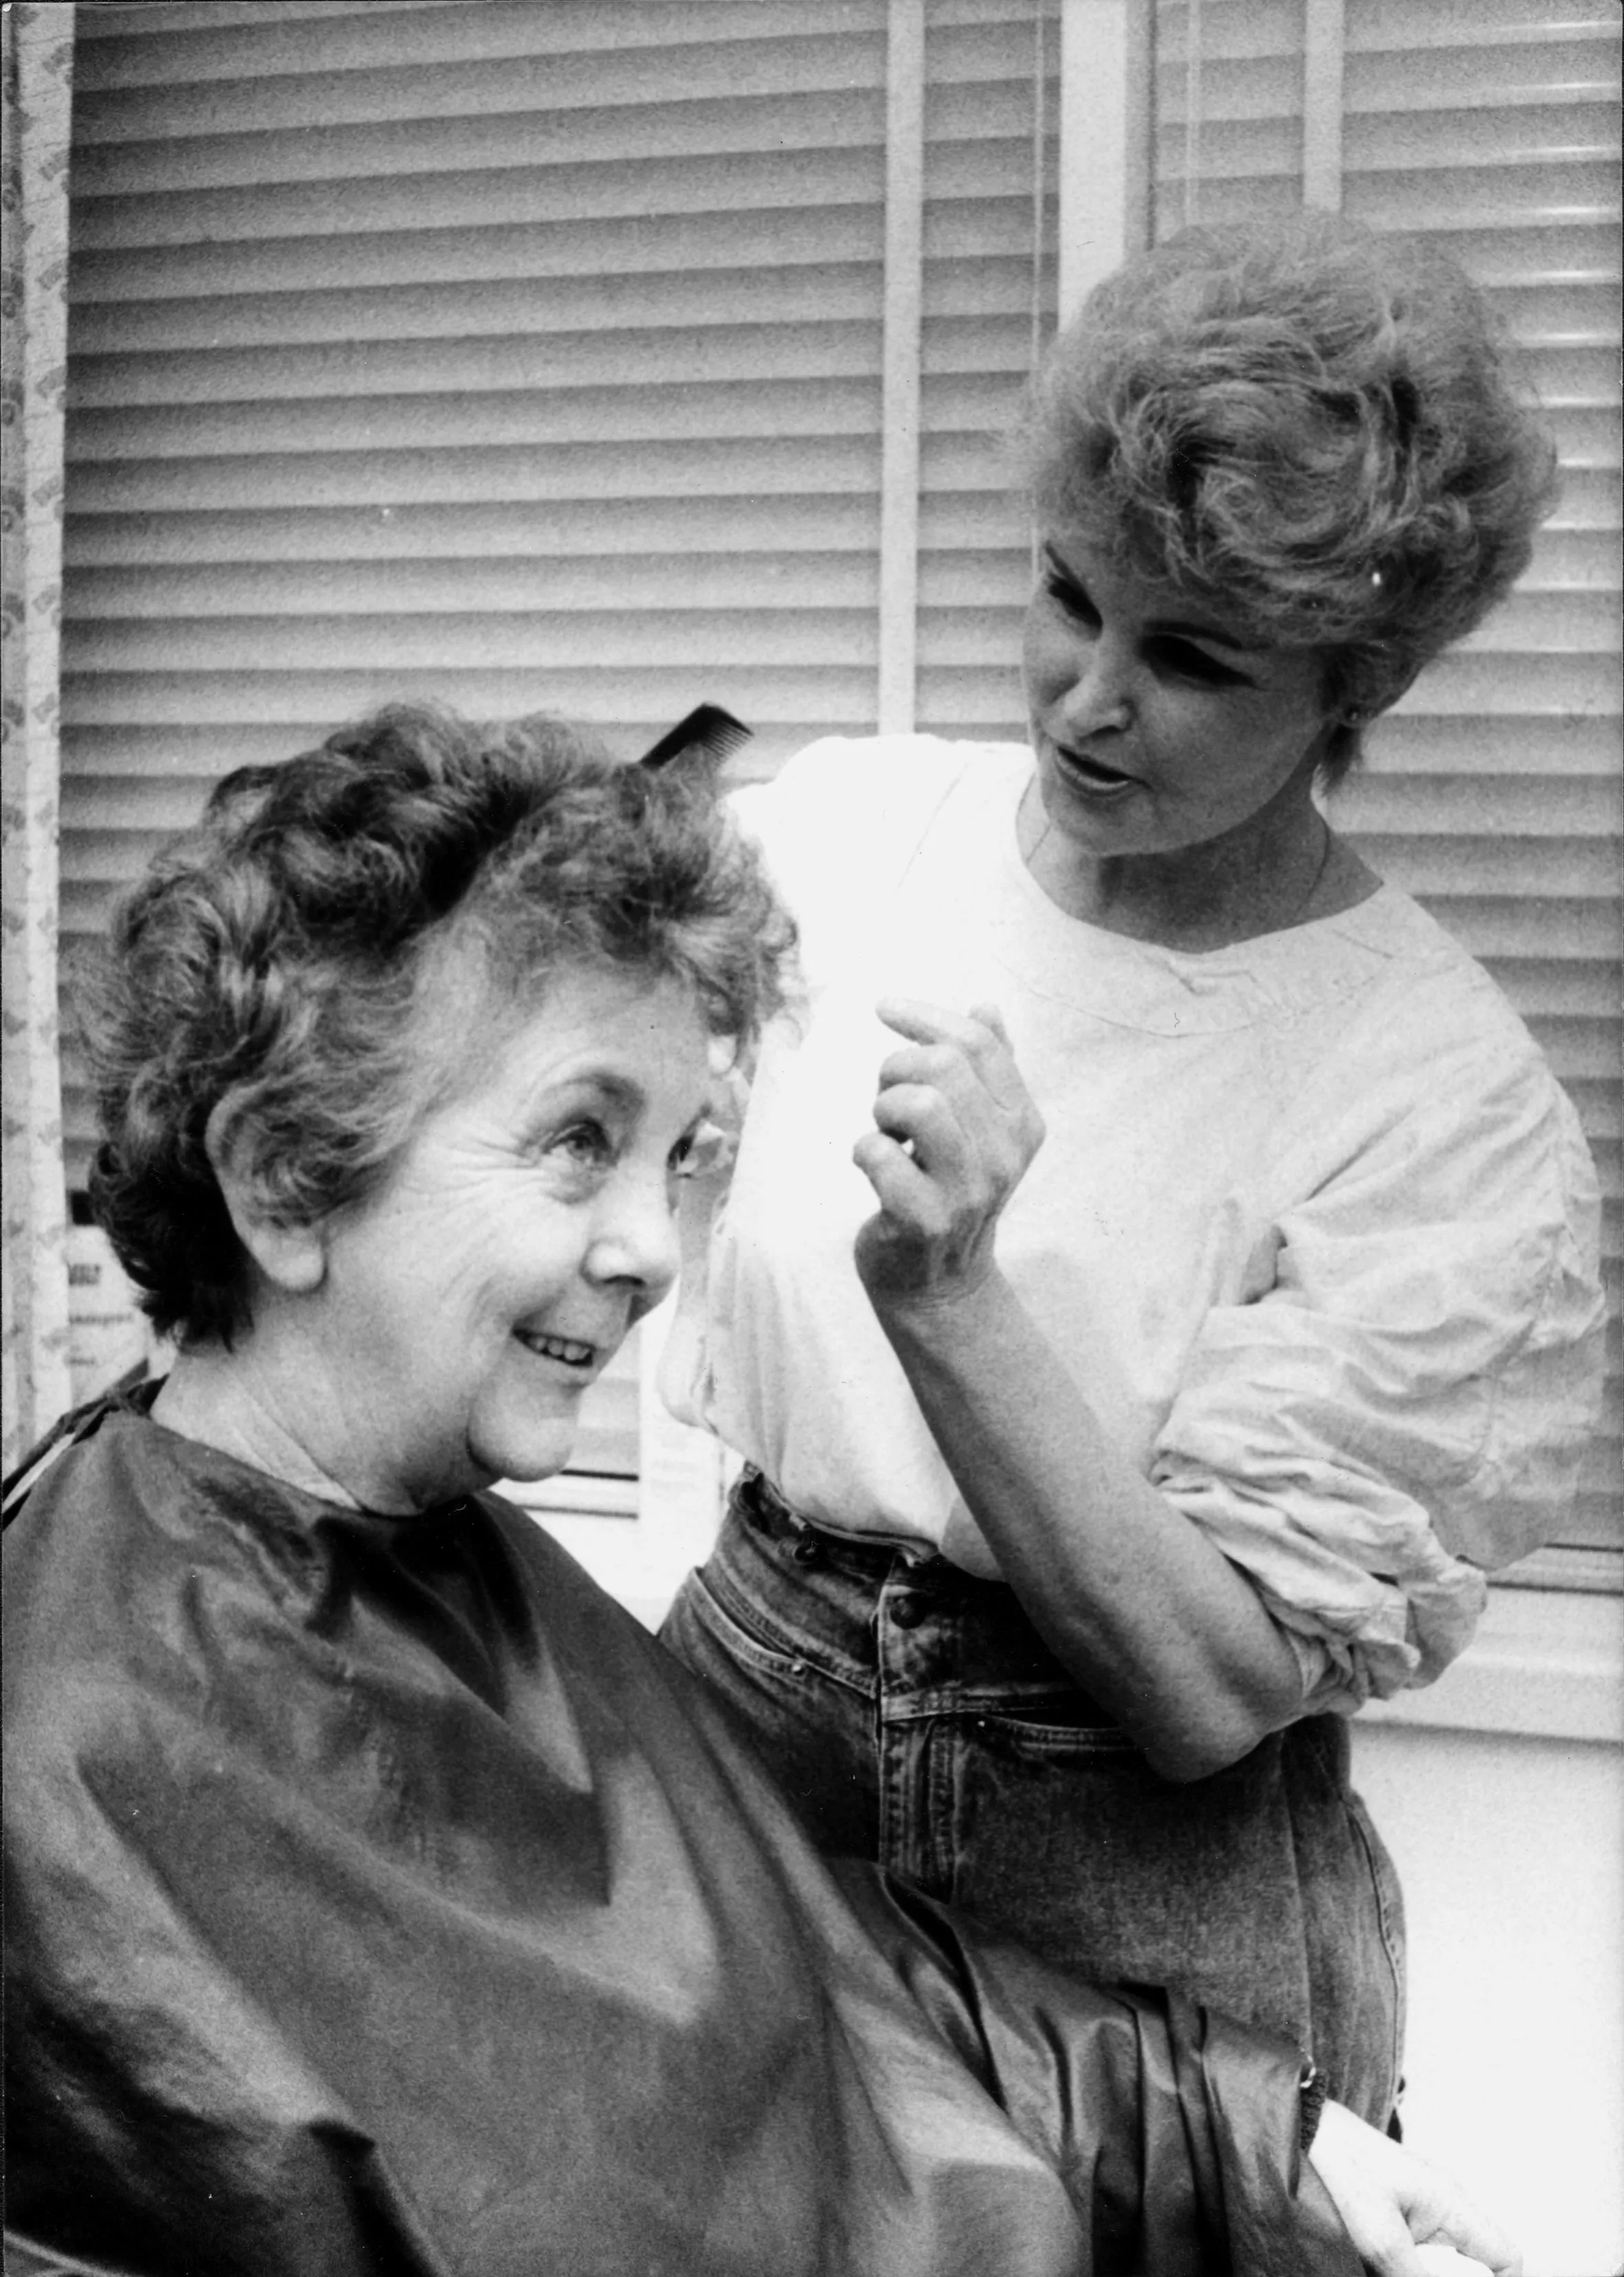 This black and white photograph depicts hairdresser Lizzie Scott, arranging Speaker Joan Child’s hair. Joan is sitting in the barber’s chair and is covered with a dark  cape while Lizzie stands to her left wearing a white shirt and jeans and holding a black comb.  